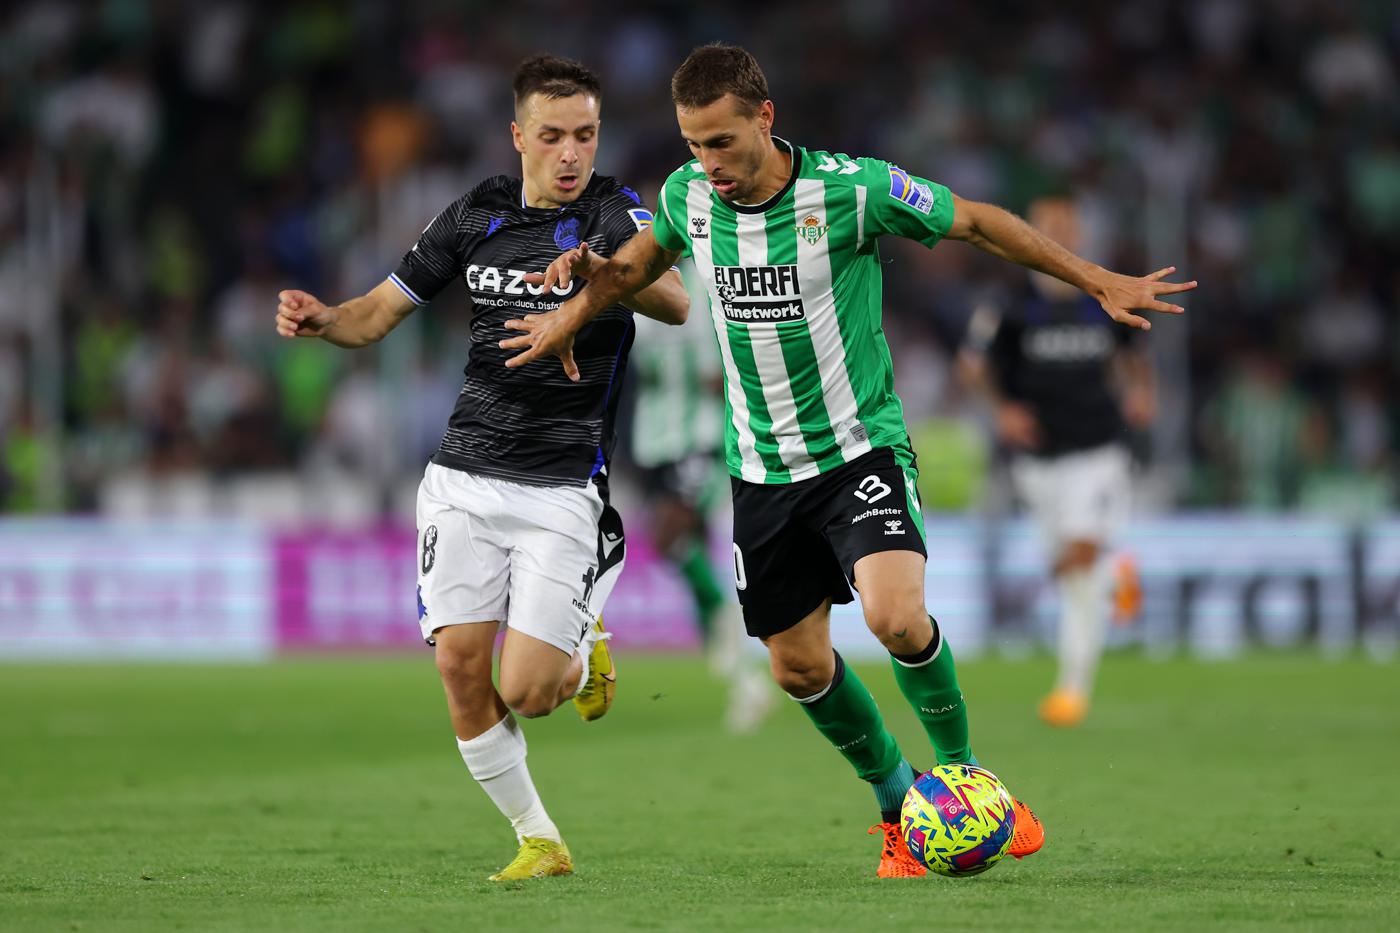 Betis - Real Madrid - 0:0. Spain Championship, round 31. Match Review, Statistics